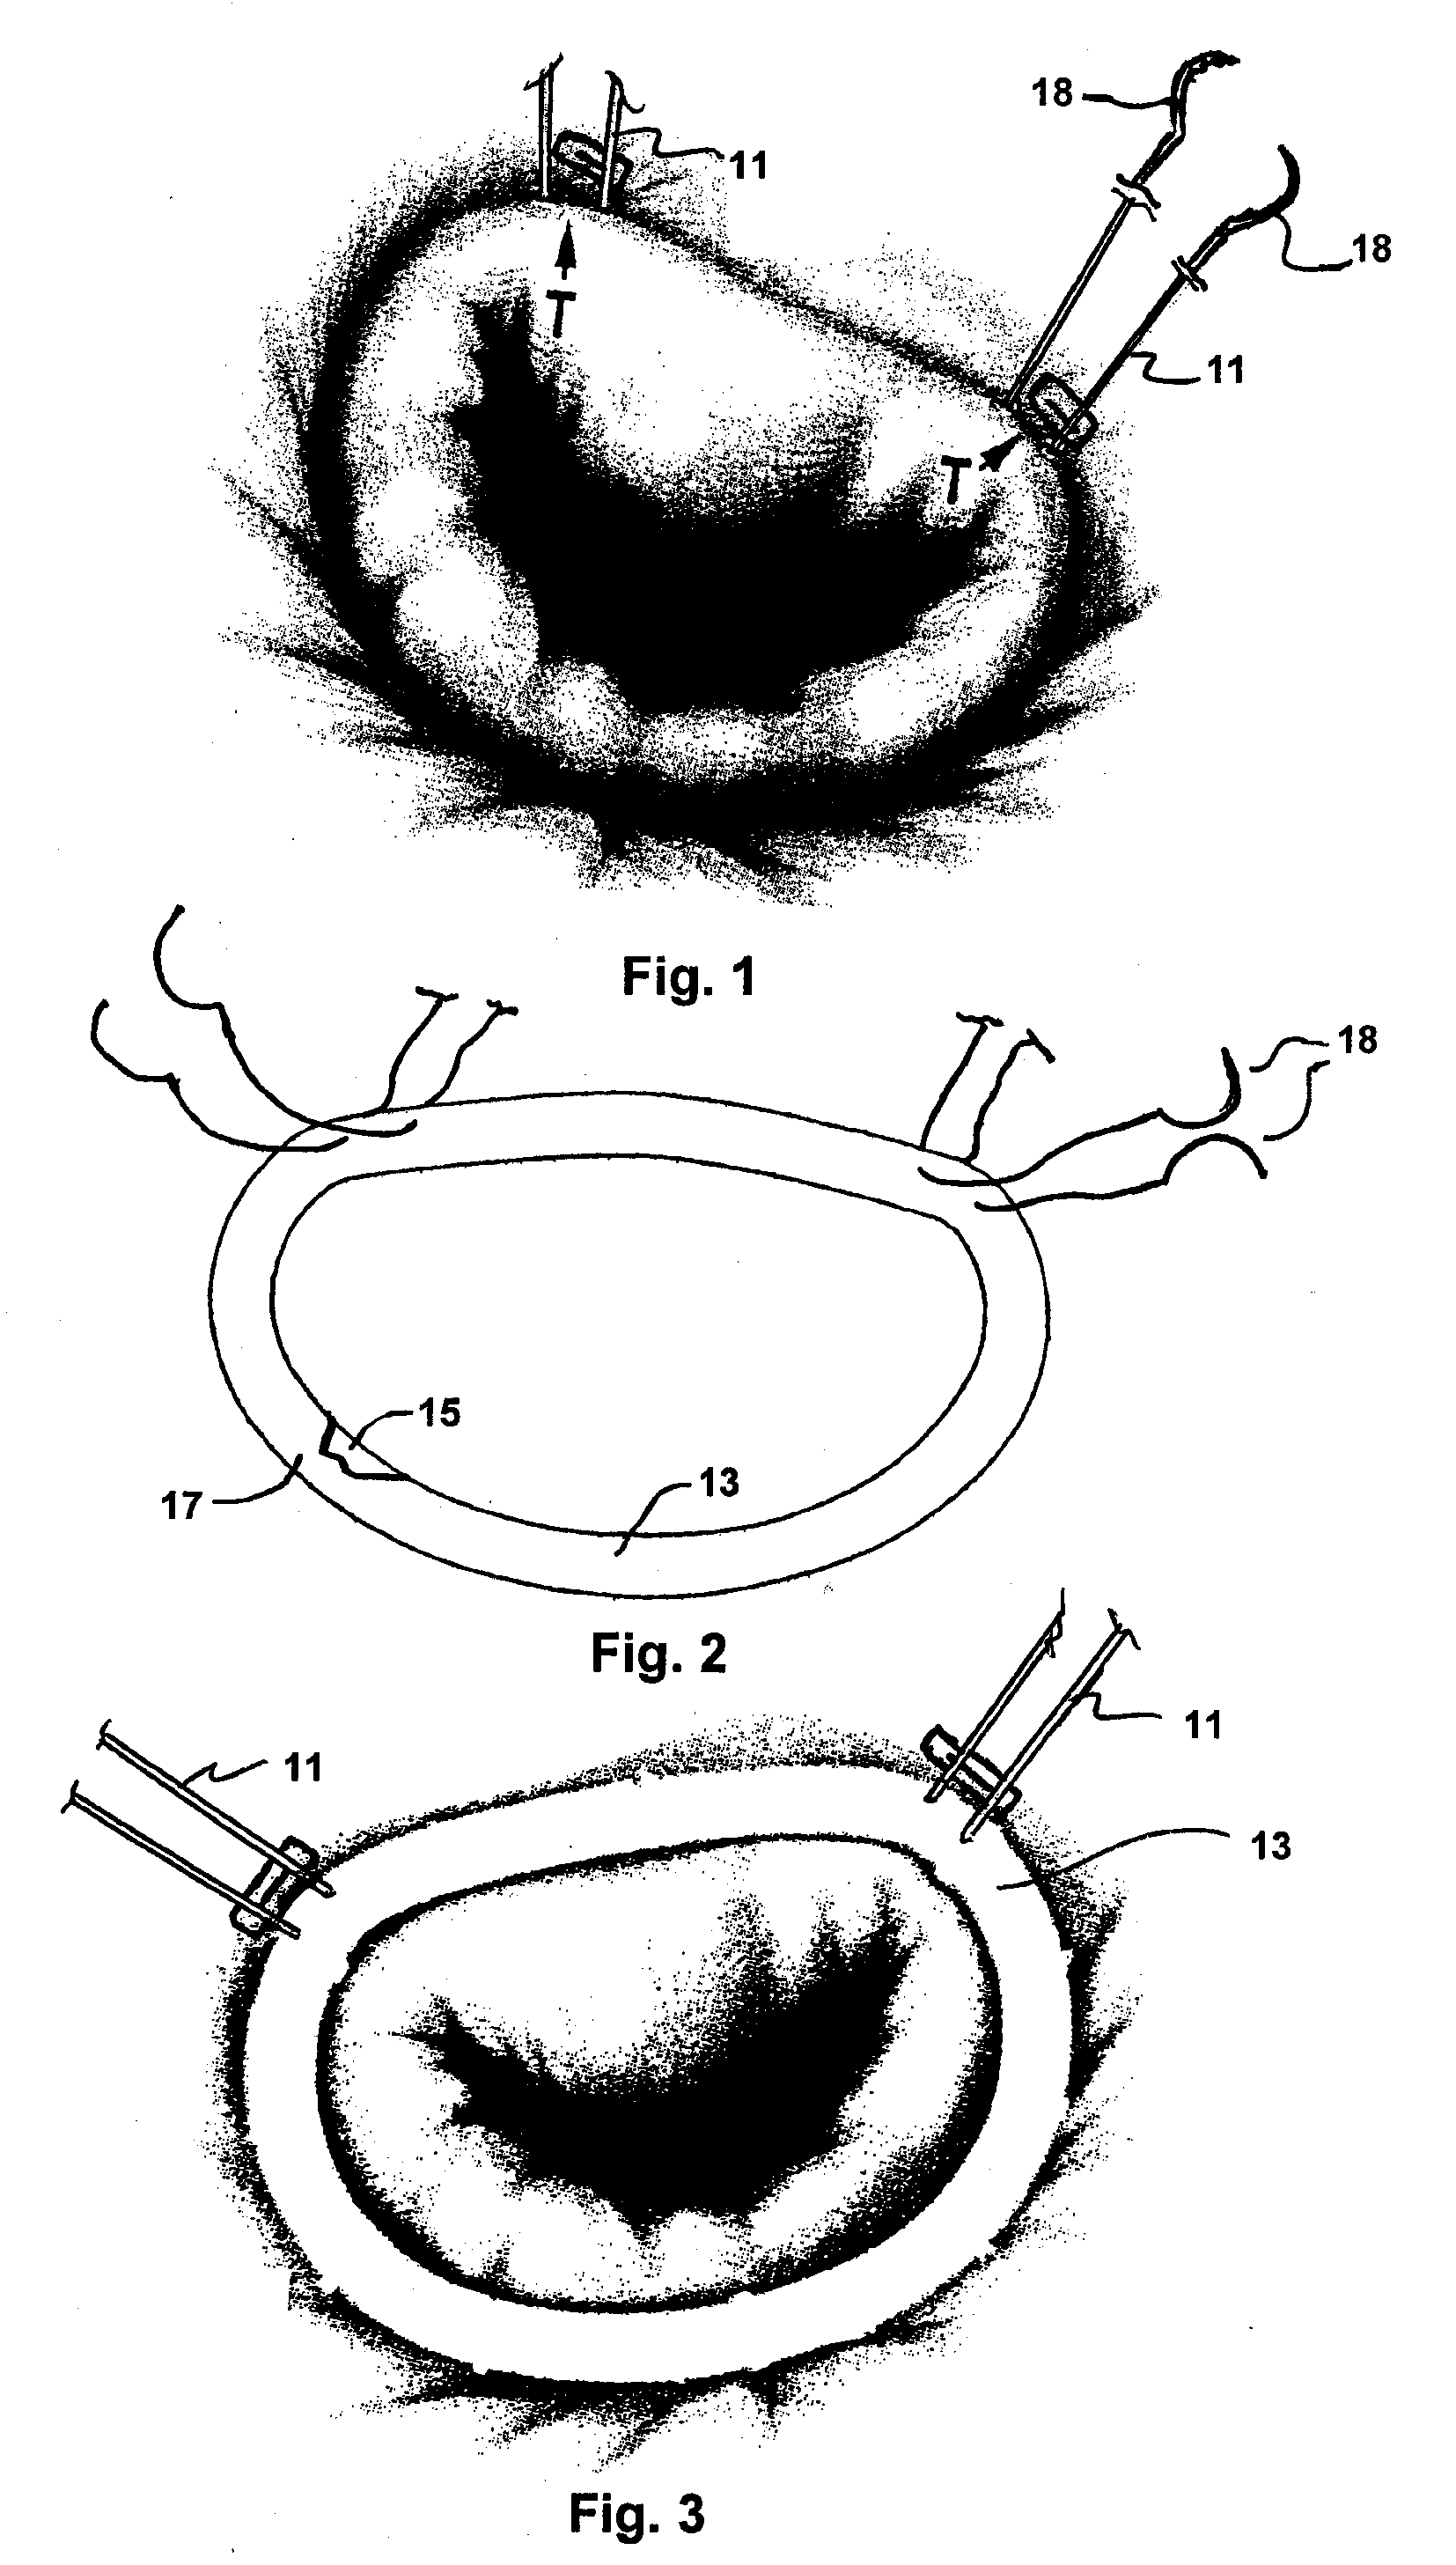 Implantation system for annuloplasty rings